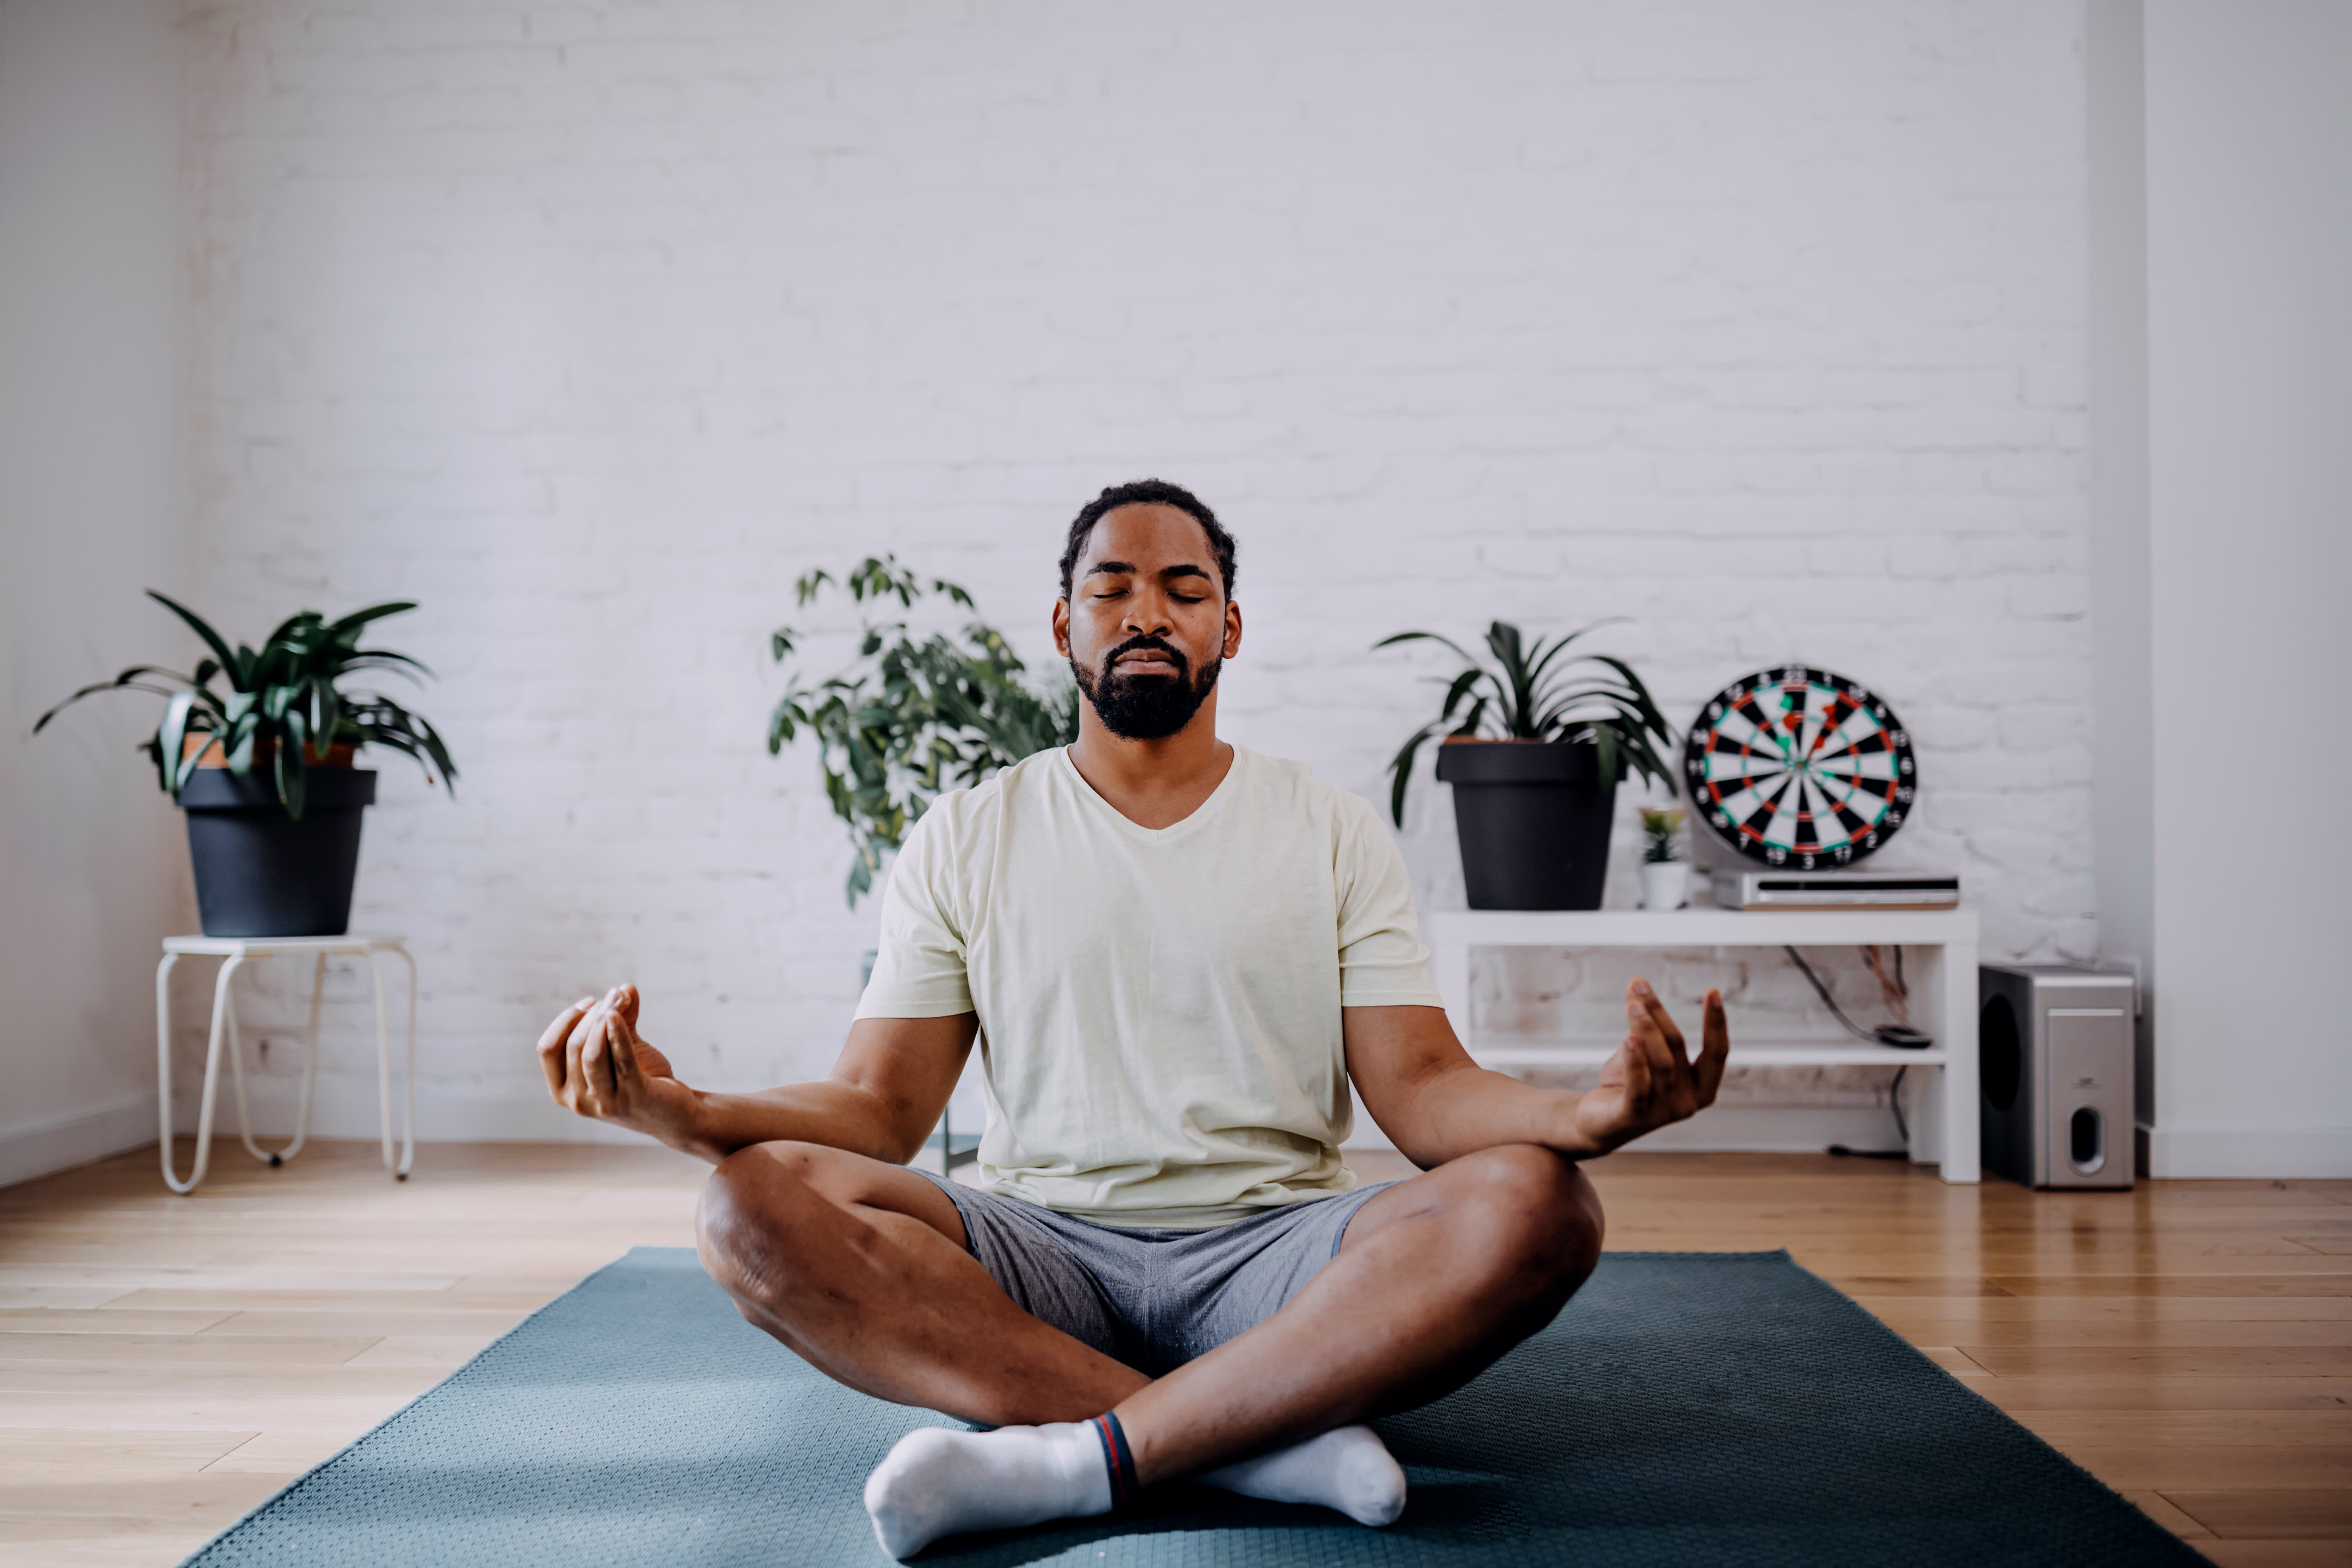 How to Start Meditating Daily for Better Overall Health